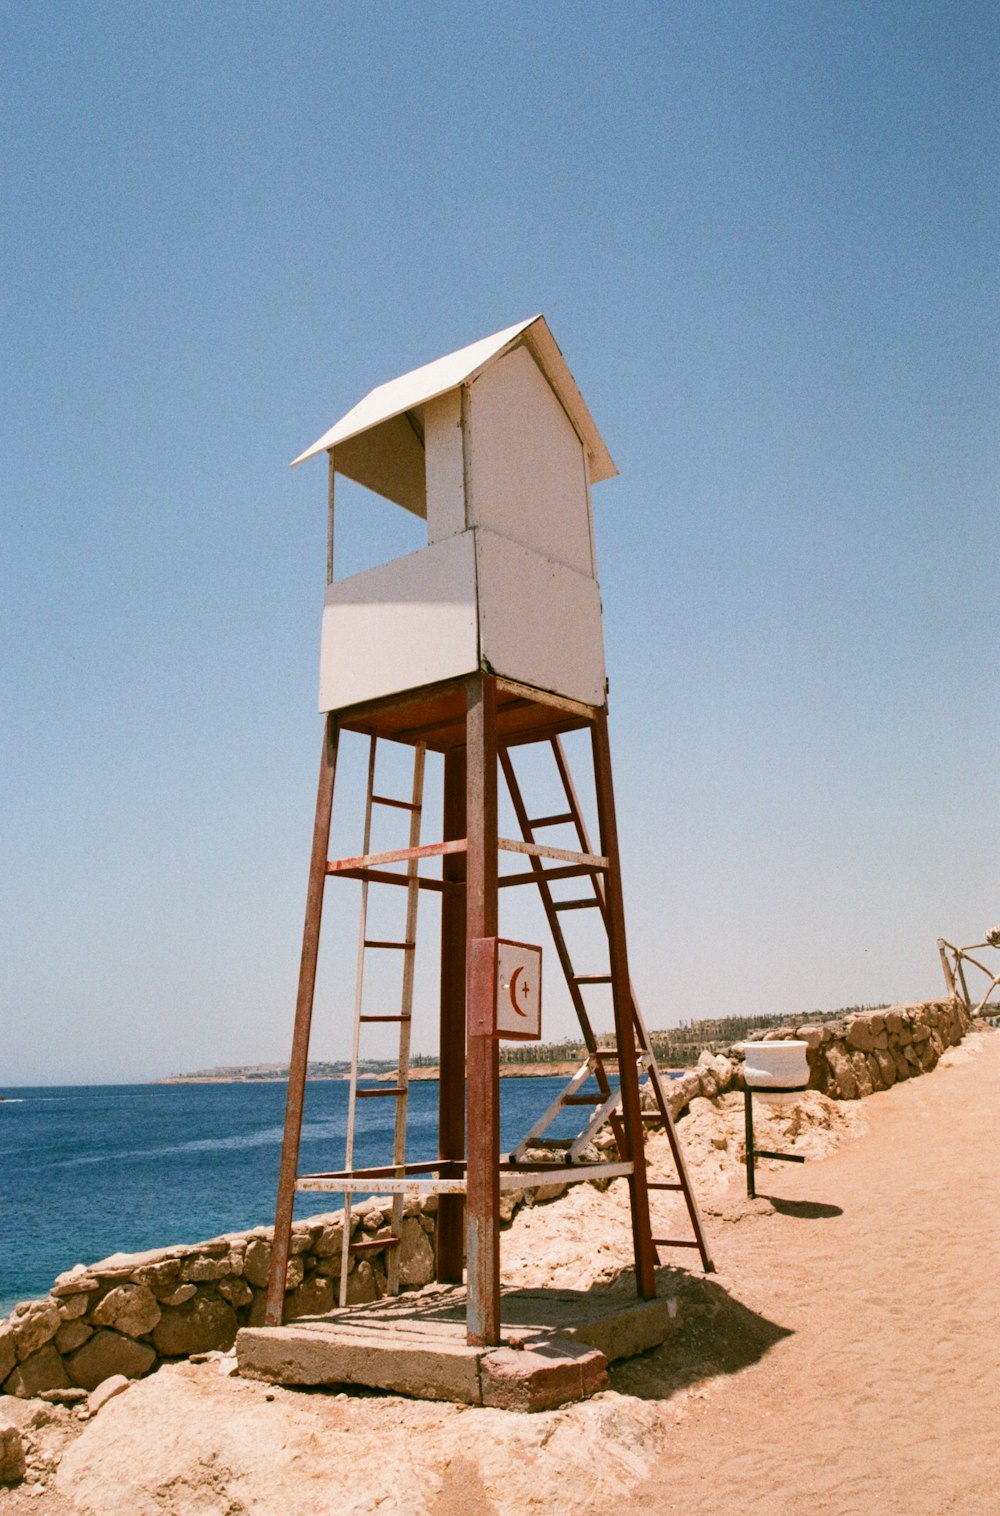 brown wooden lifeguard tower on brown sand near body of water during daytime